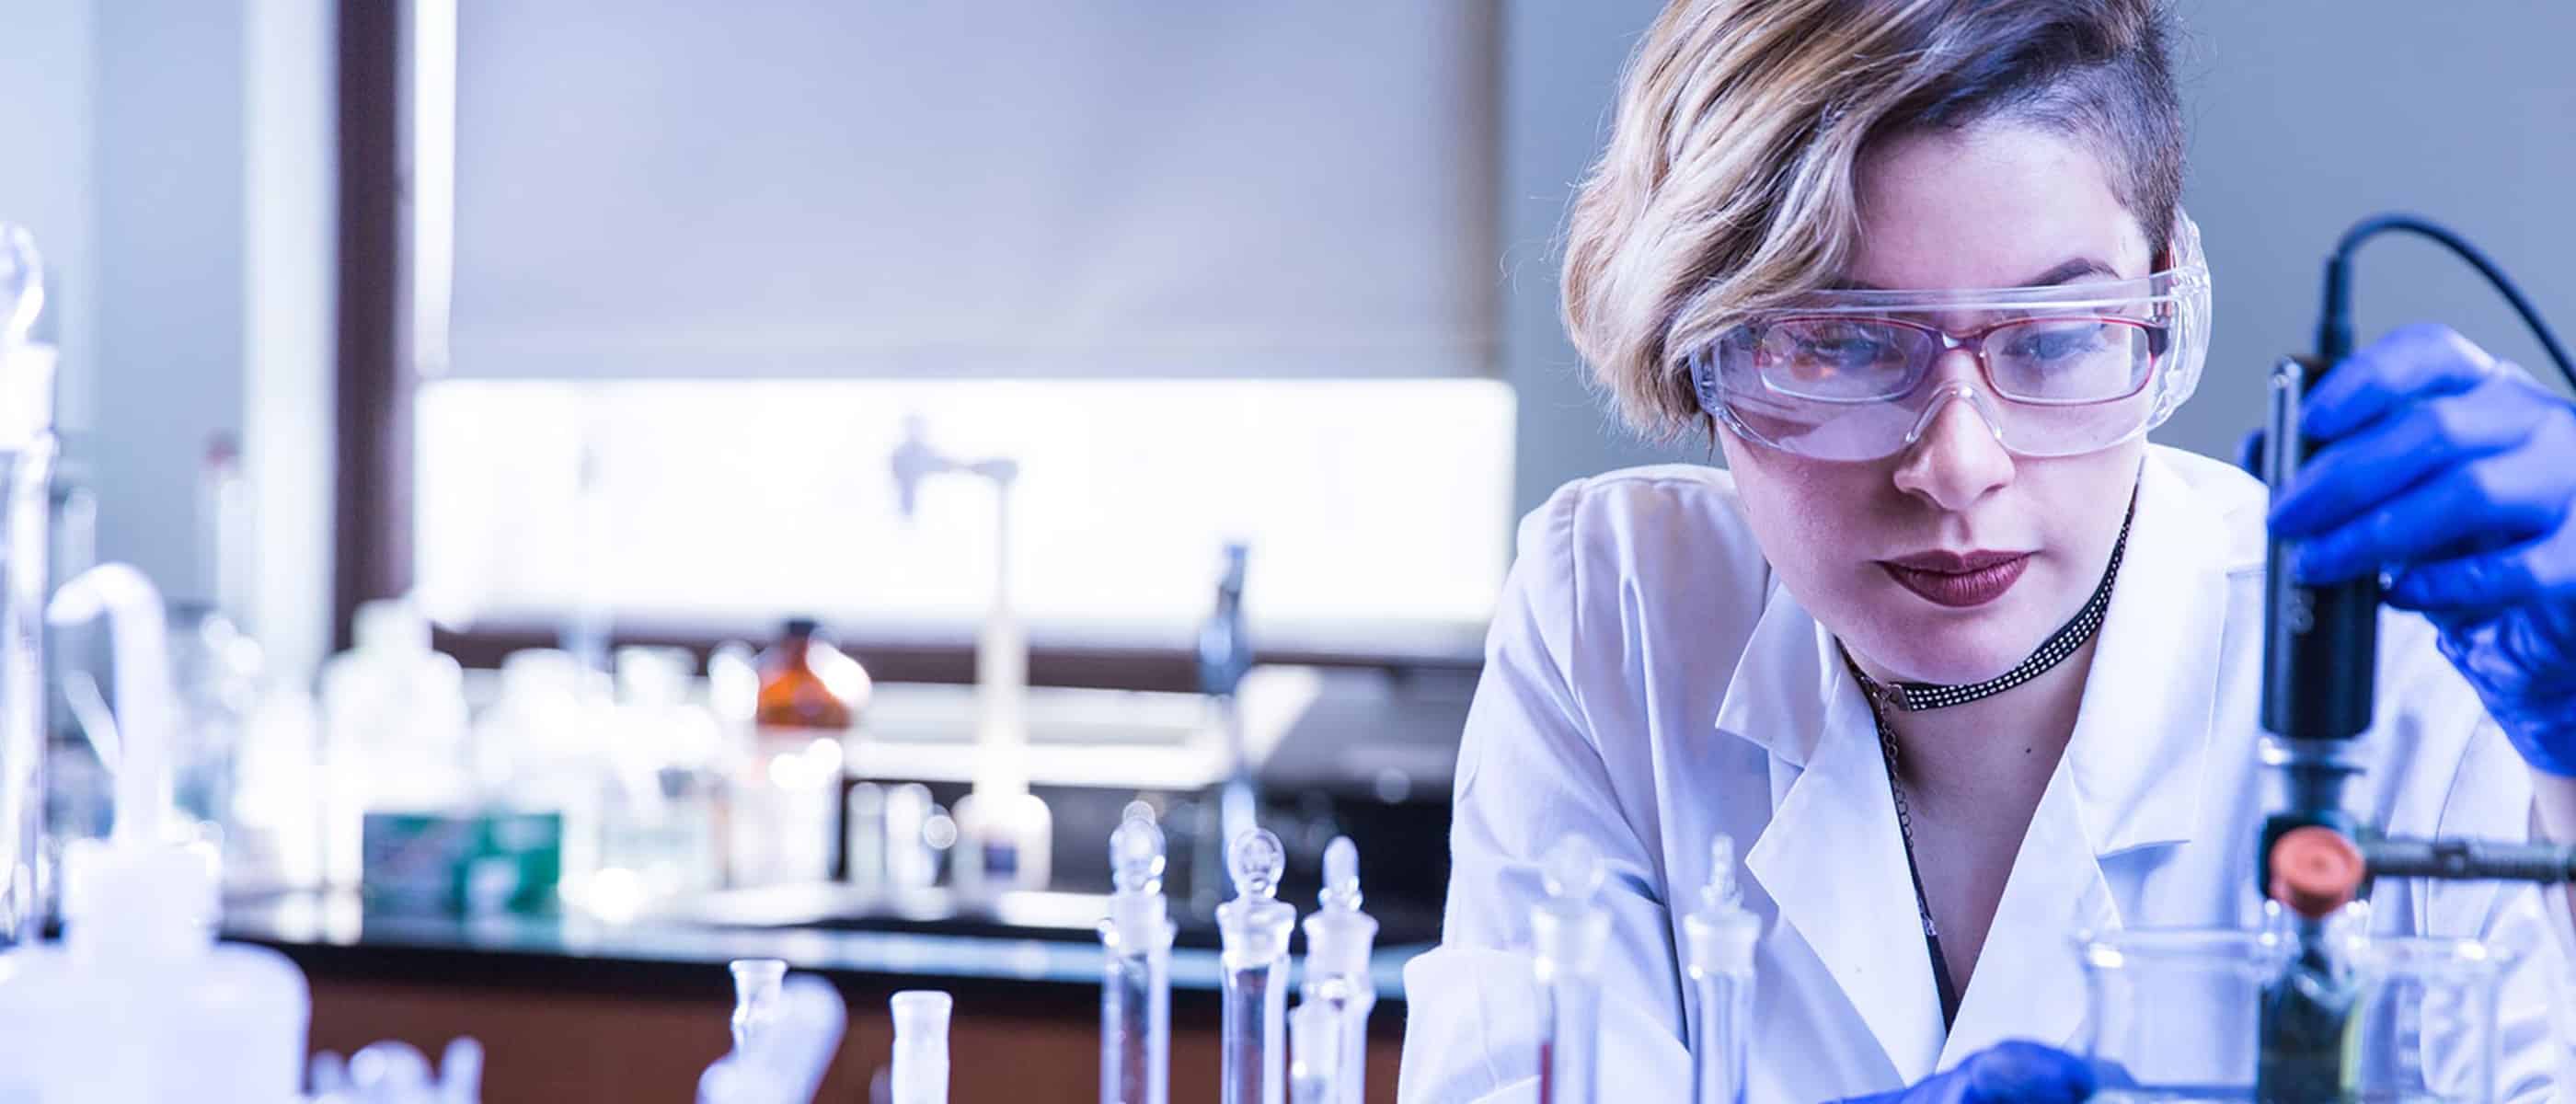 student in a science lab working with beakers